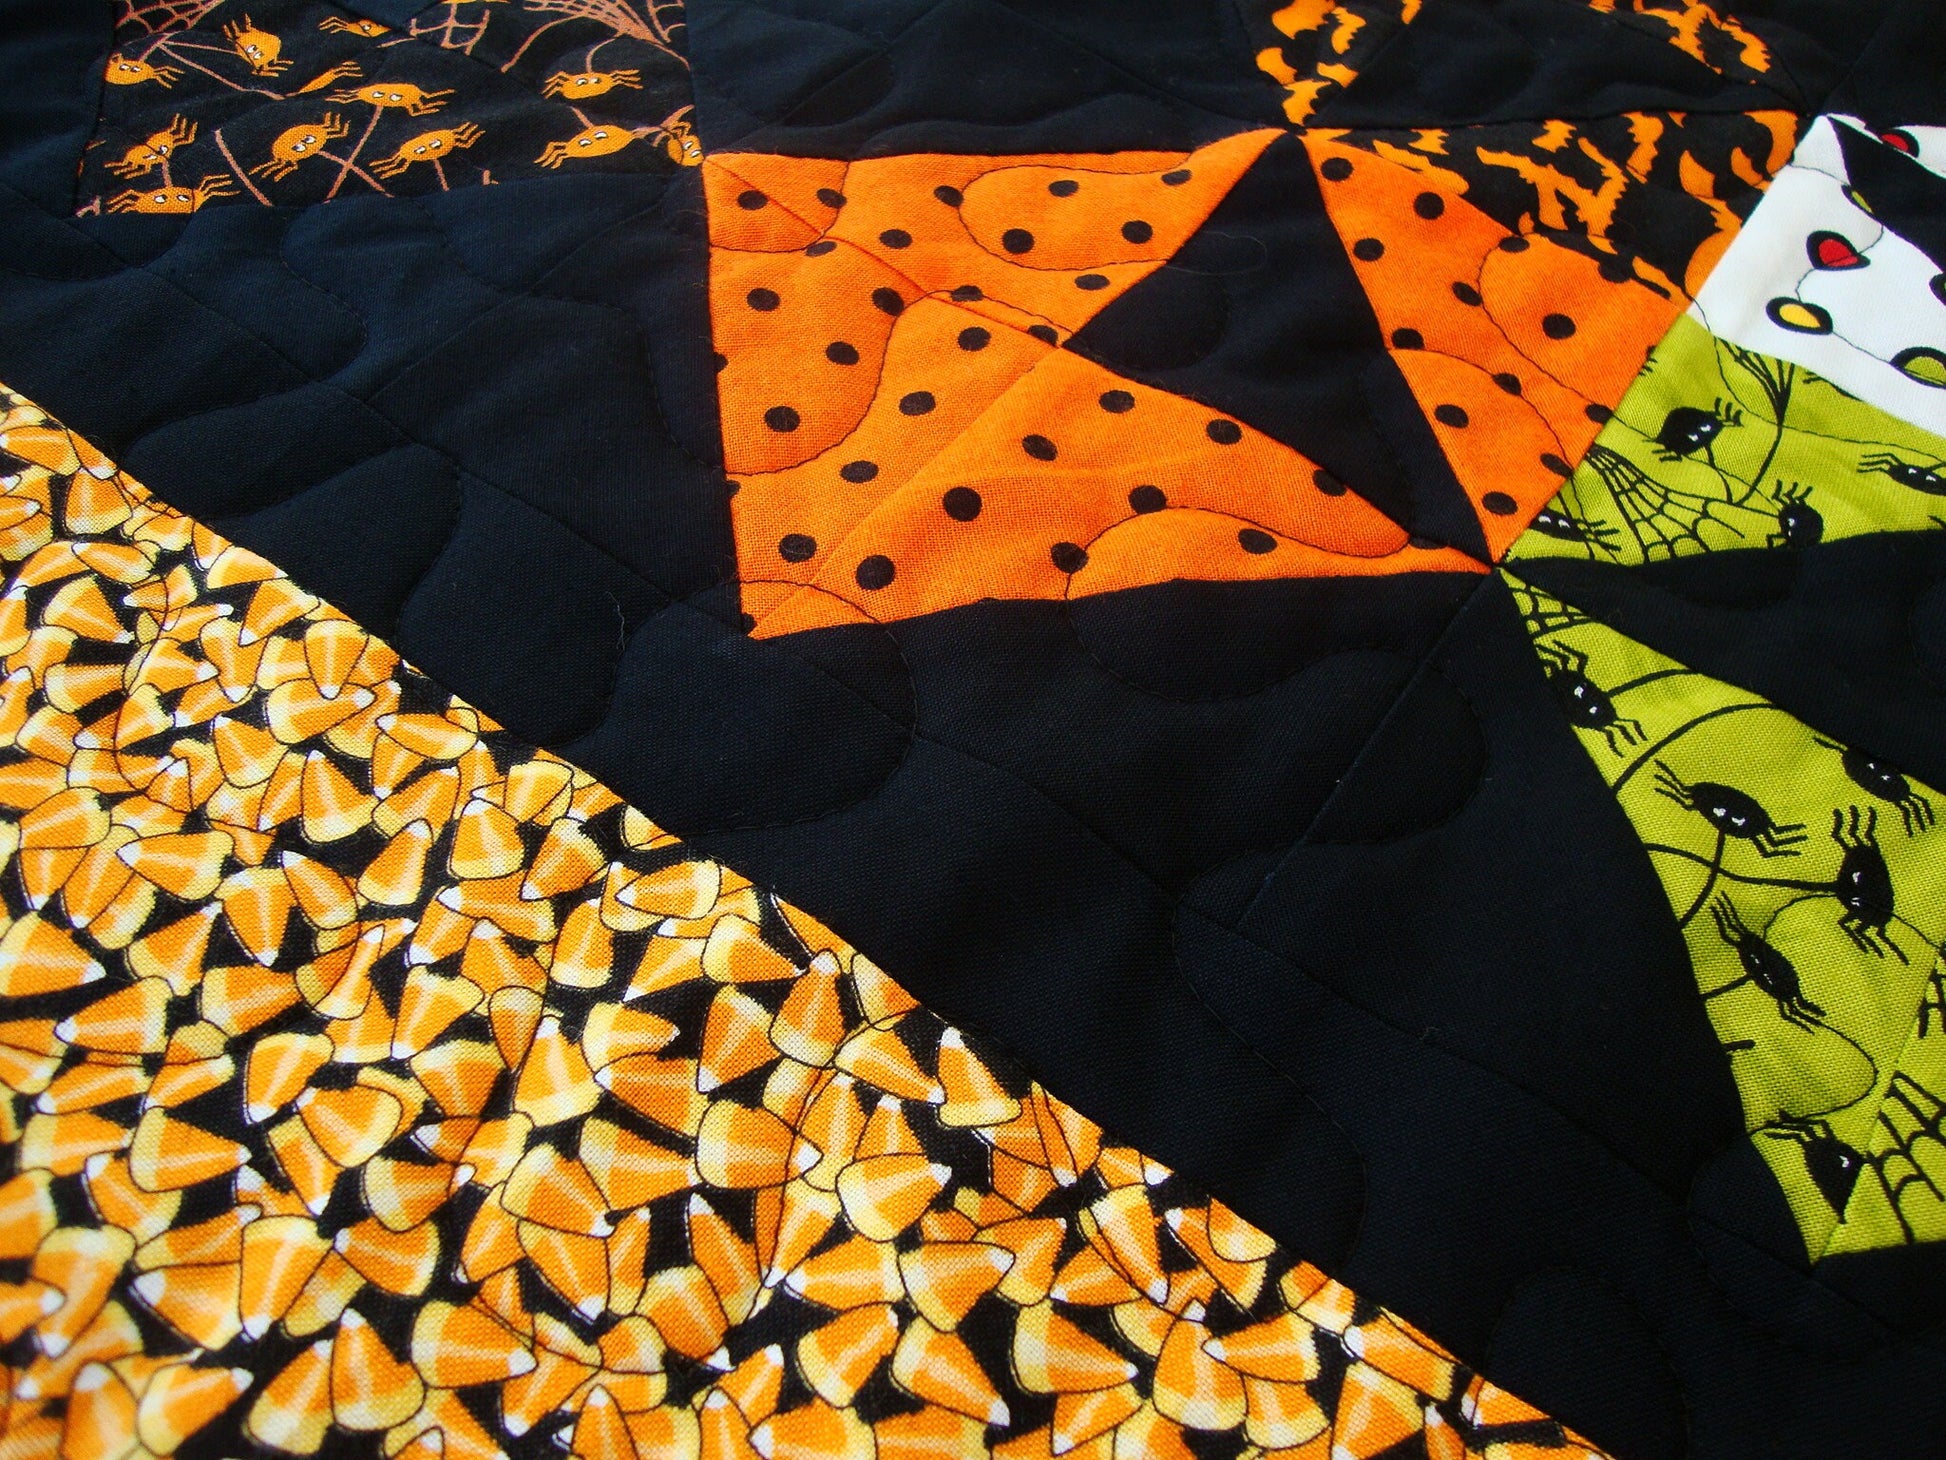 Halloween Candy Corn Quilted Table Runner, 18.75" x 38.5", Halloween Decor, Trick or Treat by Deb Strain, Candy Corn Bats Fabric Runner